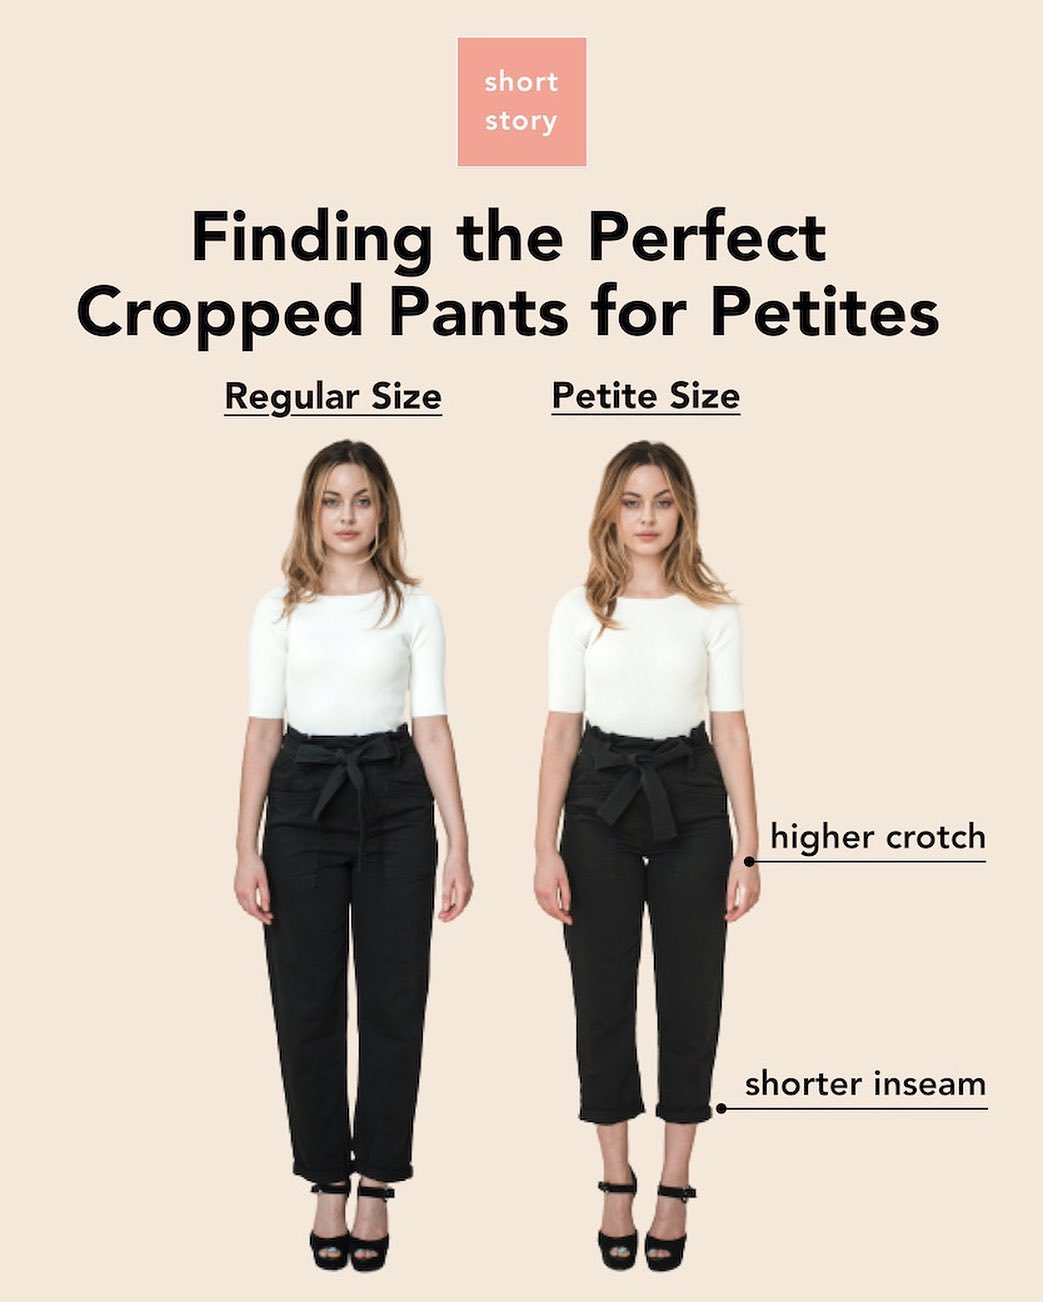 4 Ways to Wear Cigarette Pants - wikiHow